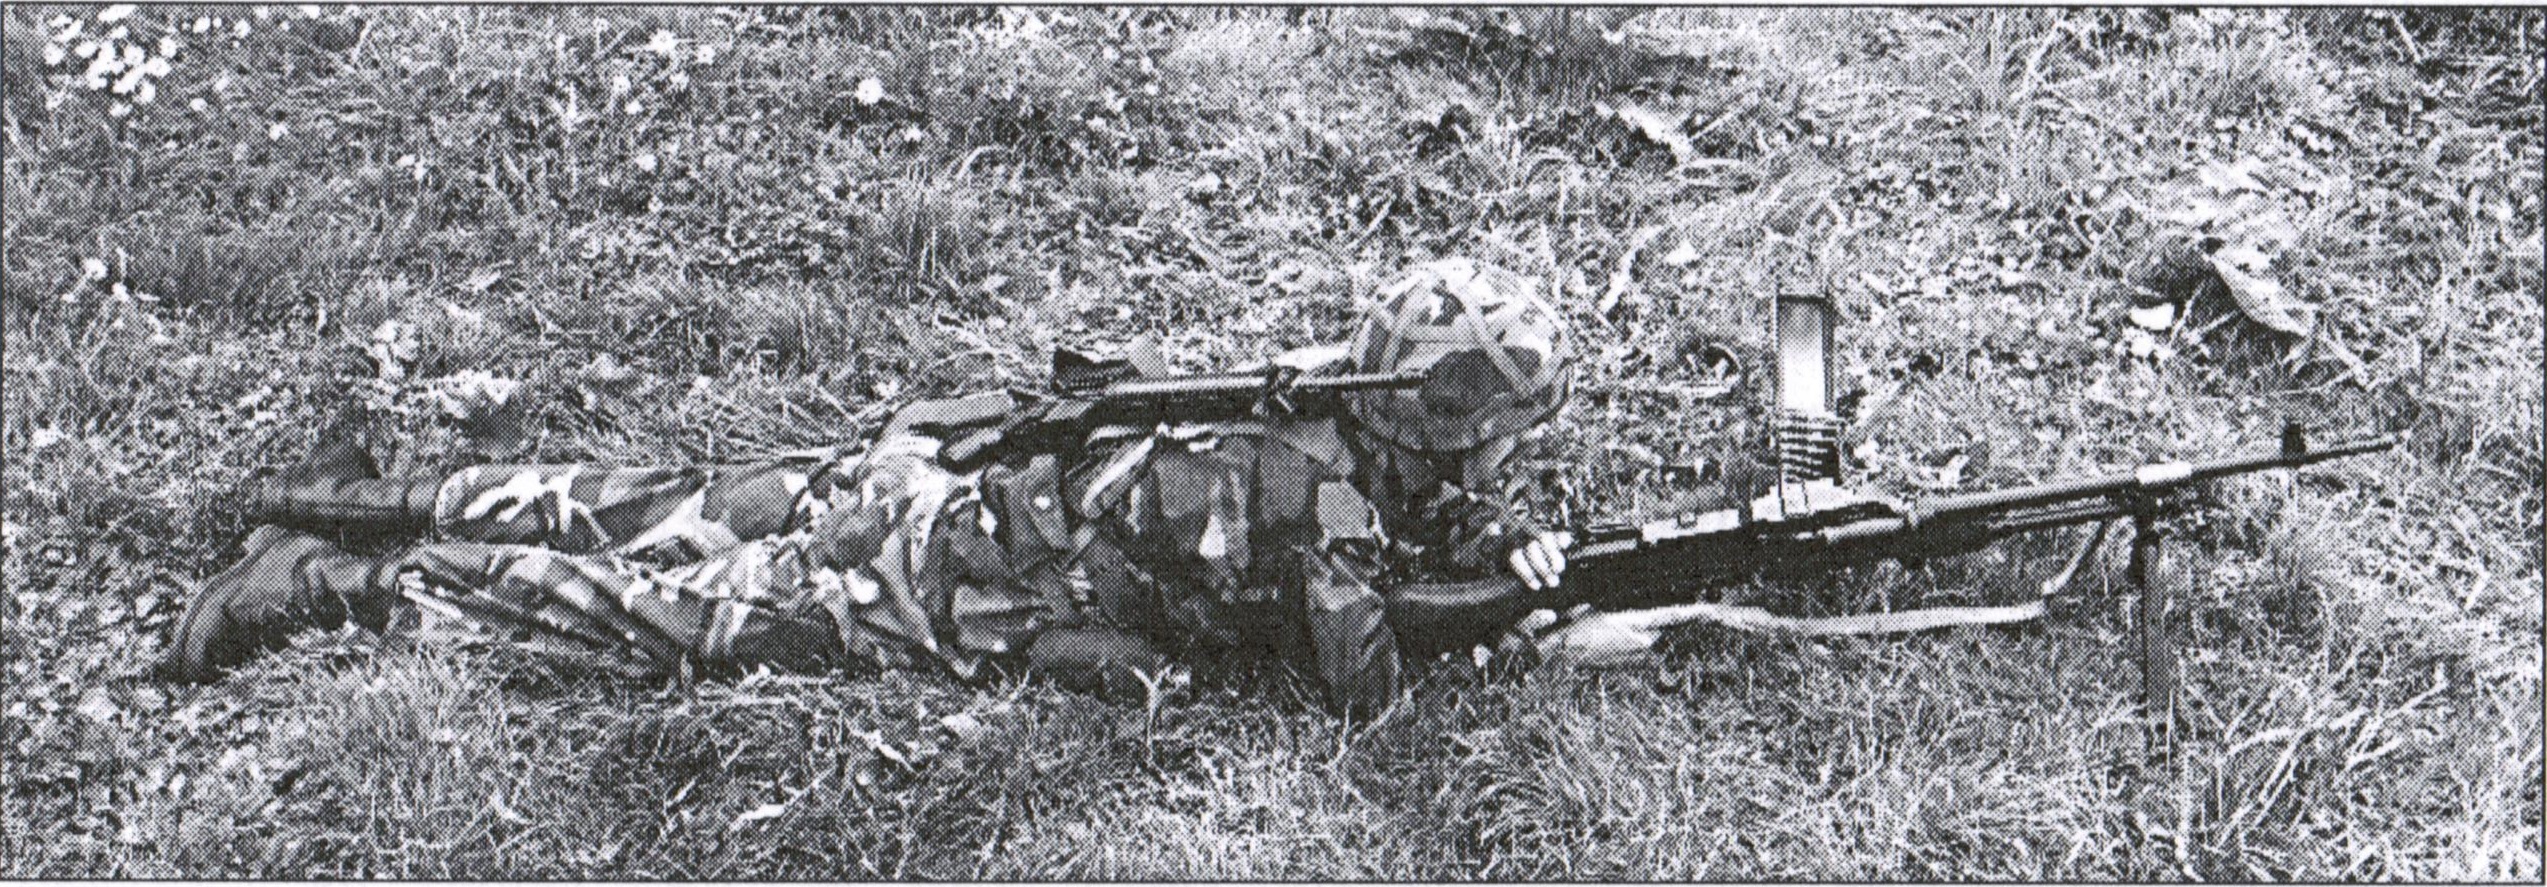 An MAG-gunner with a slung Diemaco on his back